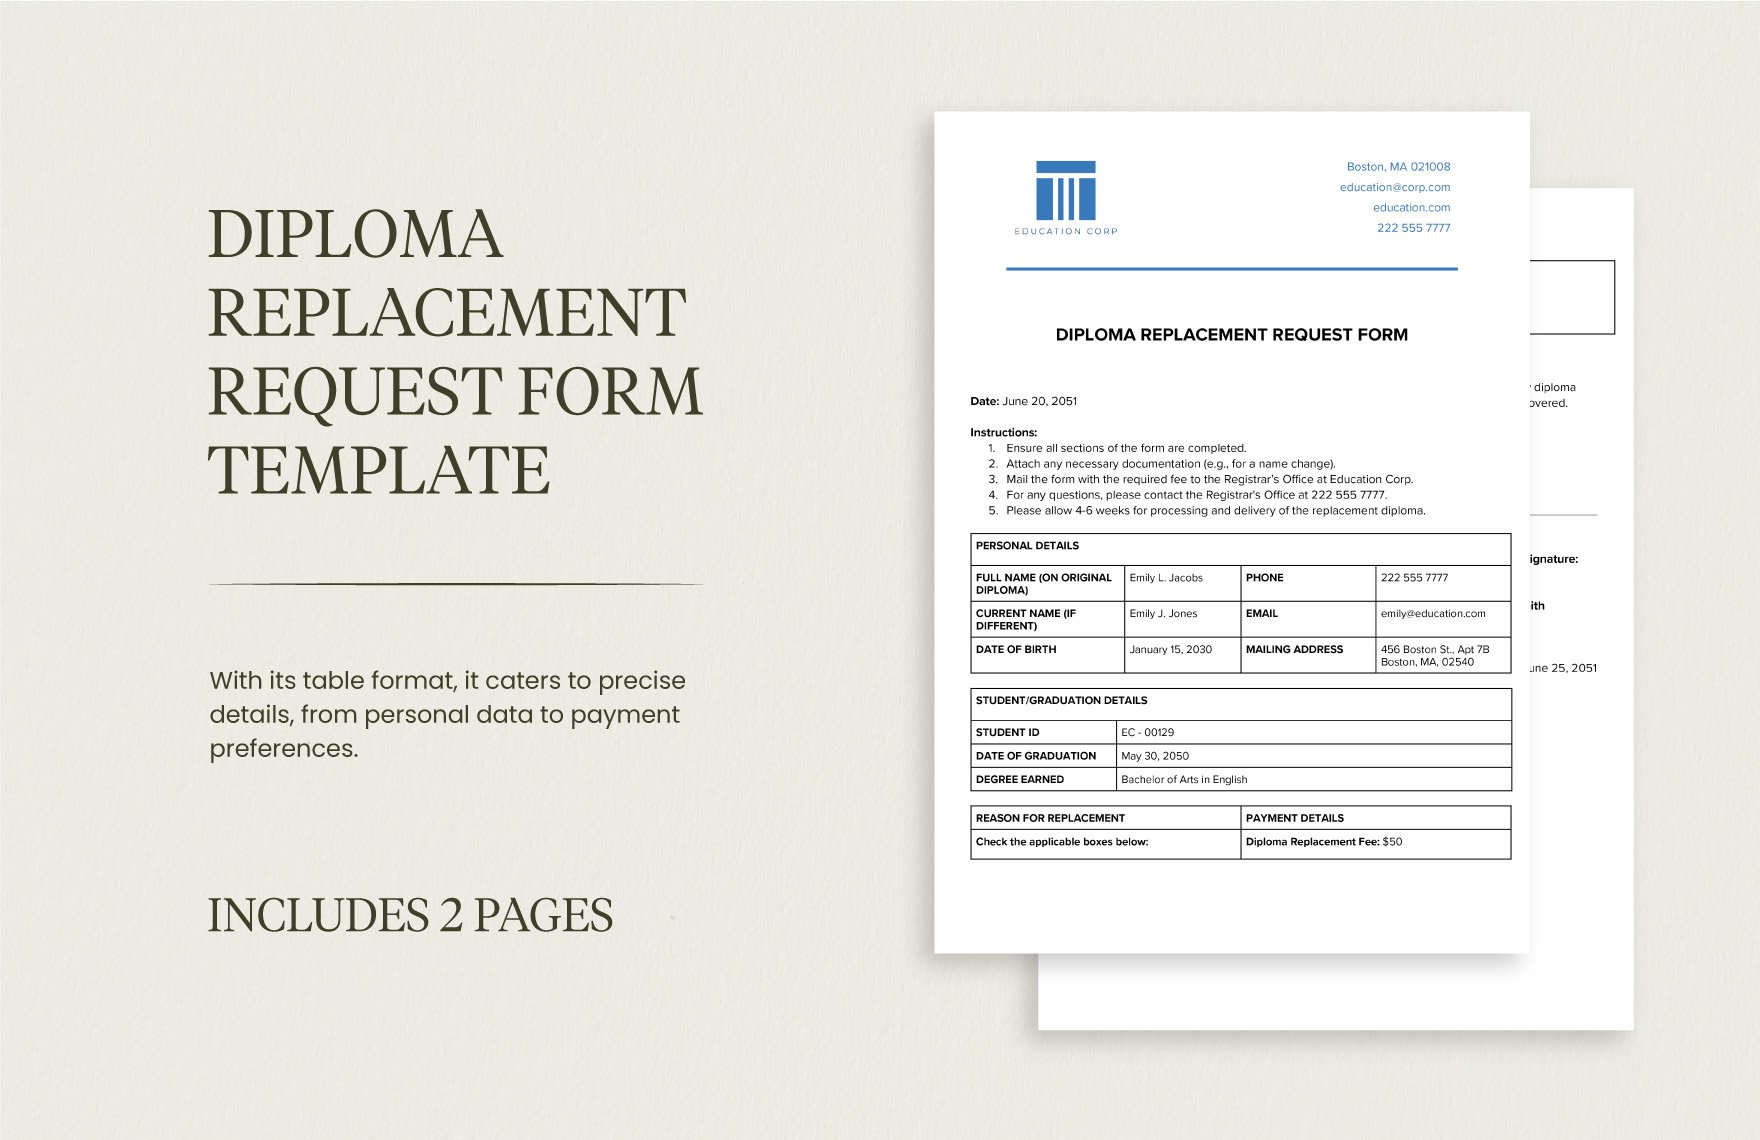 Diploma Replacement Request Form Template in Word, Google Docs, PDF